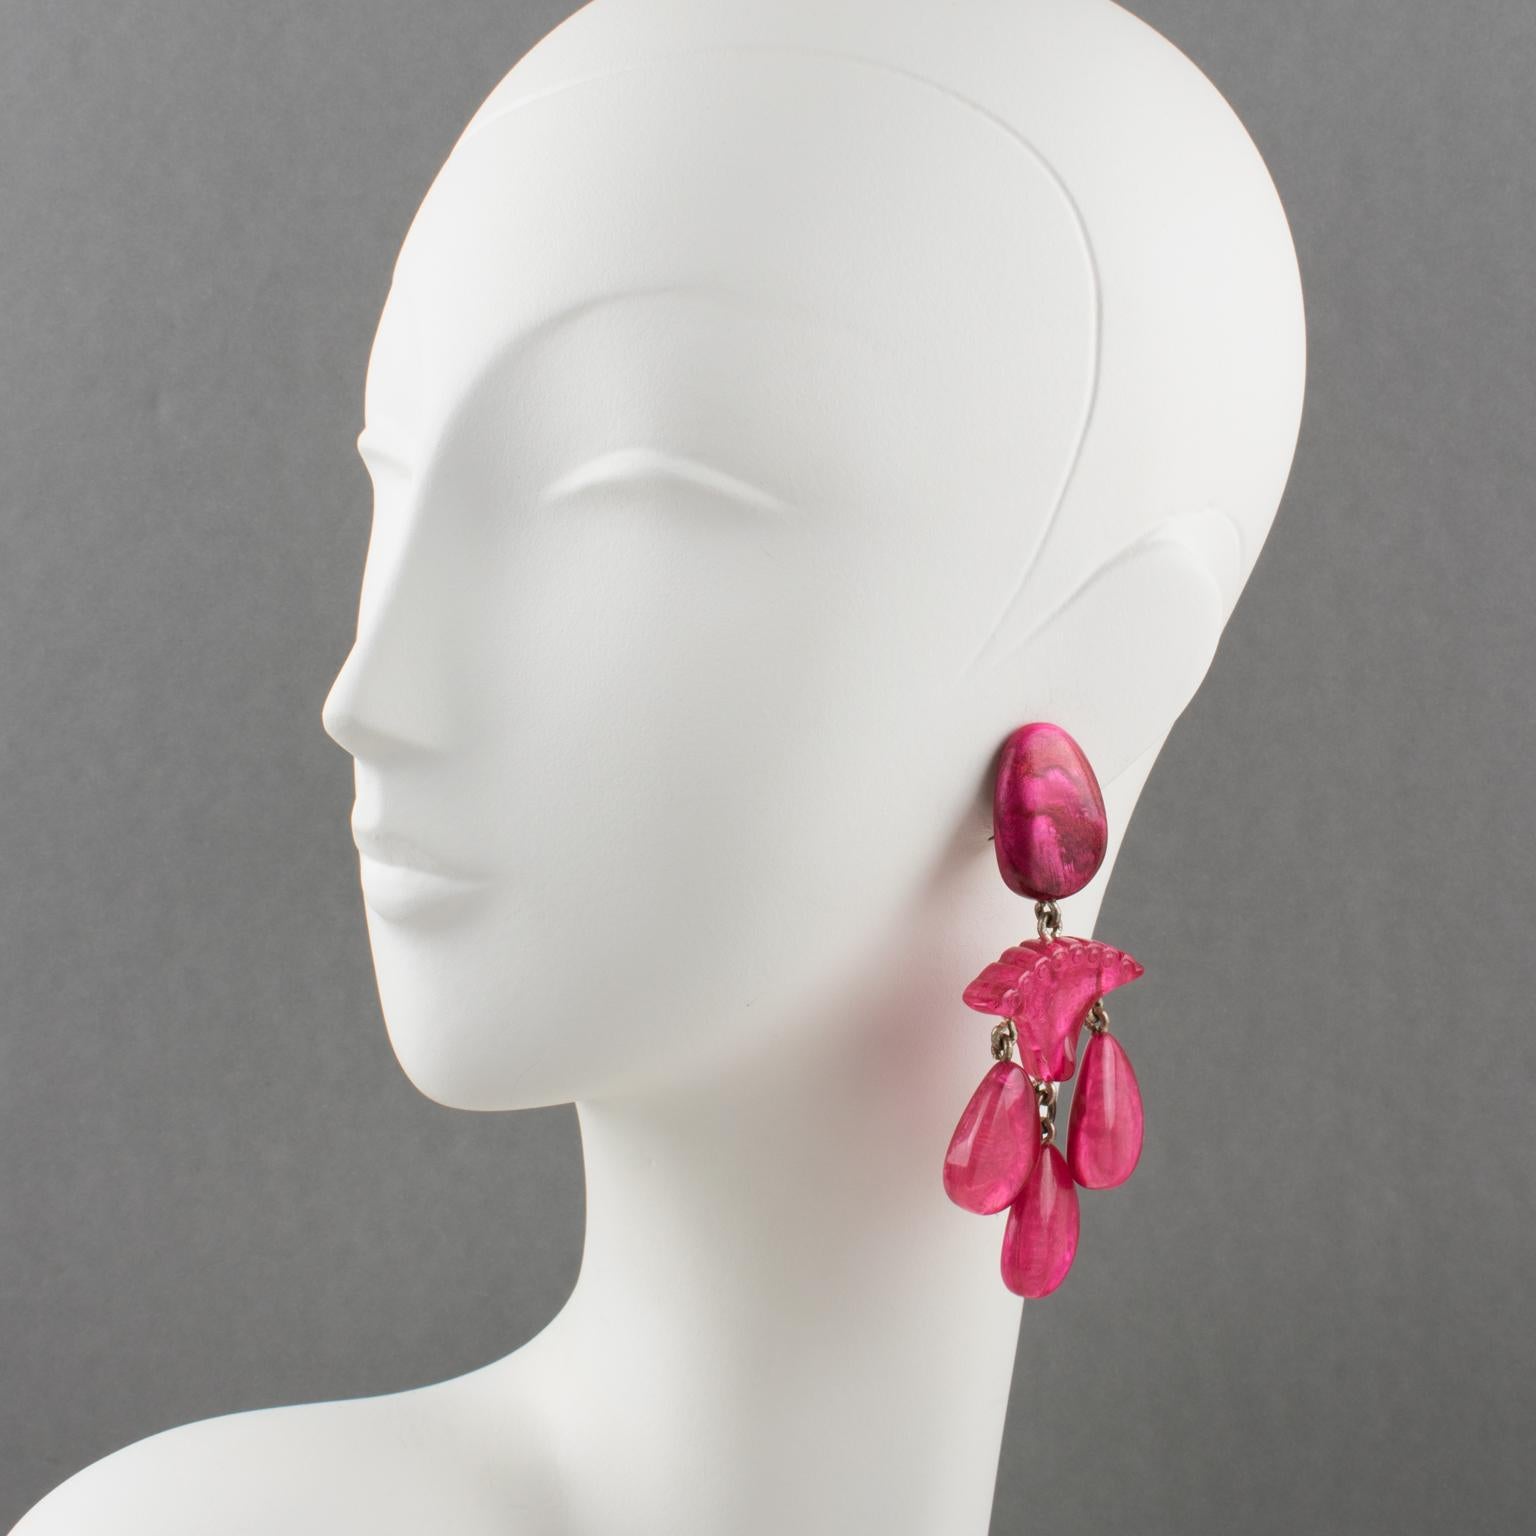 Stunning oversized clip-on earrings by Dominique Denaive Paris. Sculptural chandelier dangling shape, with carved resin, and drop charms in unusual moonglow hot pink color. Signed at the back of one earring with metal tag 